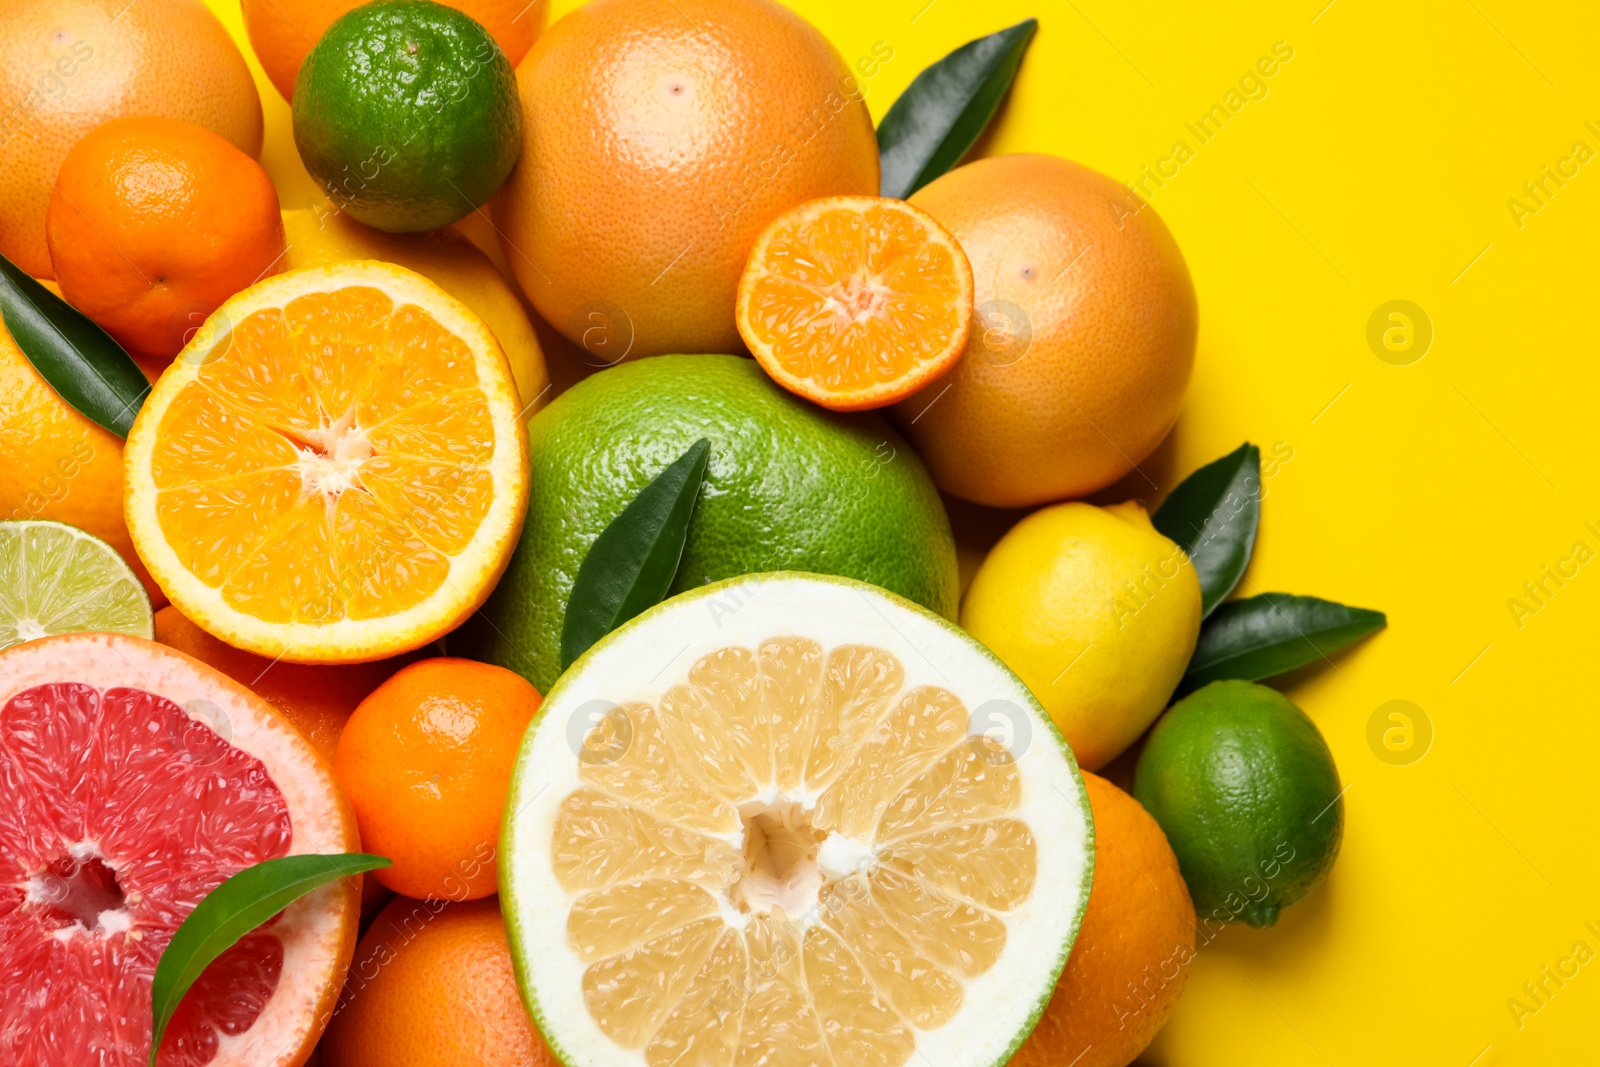 Photo of Different ripe citrus fruits with green leaves on yellow background, flat lay